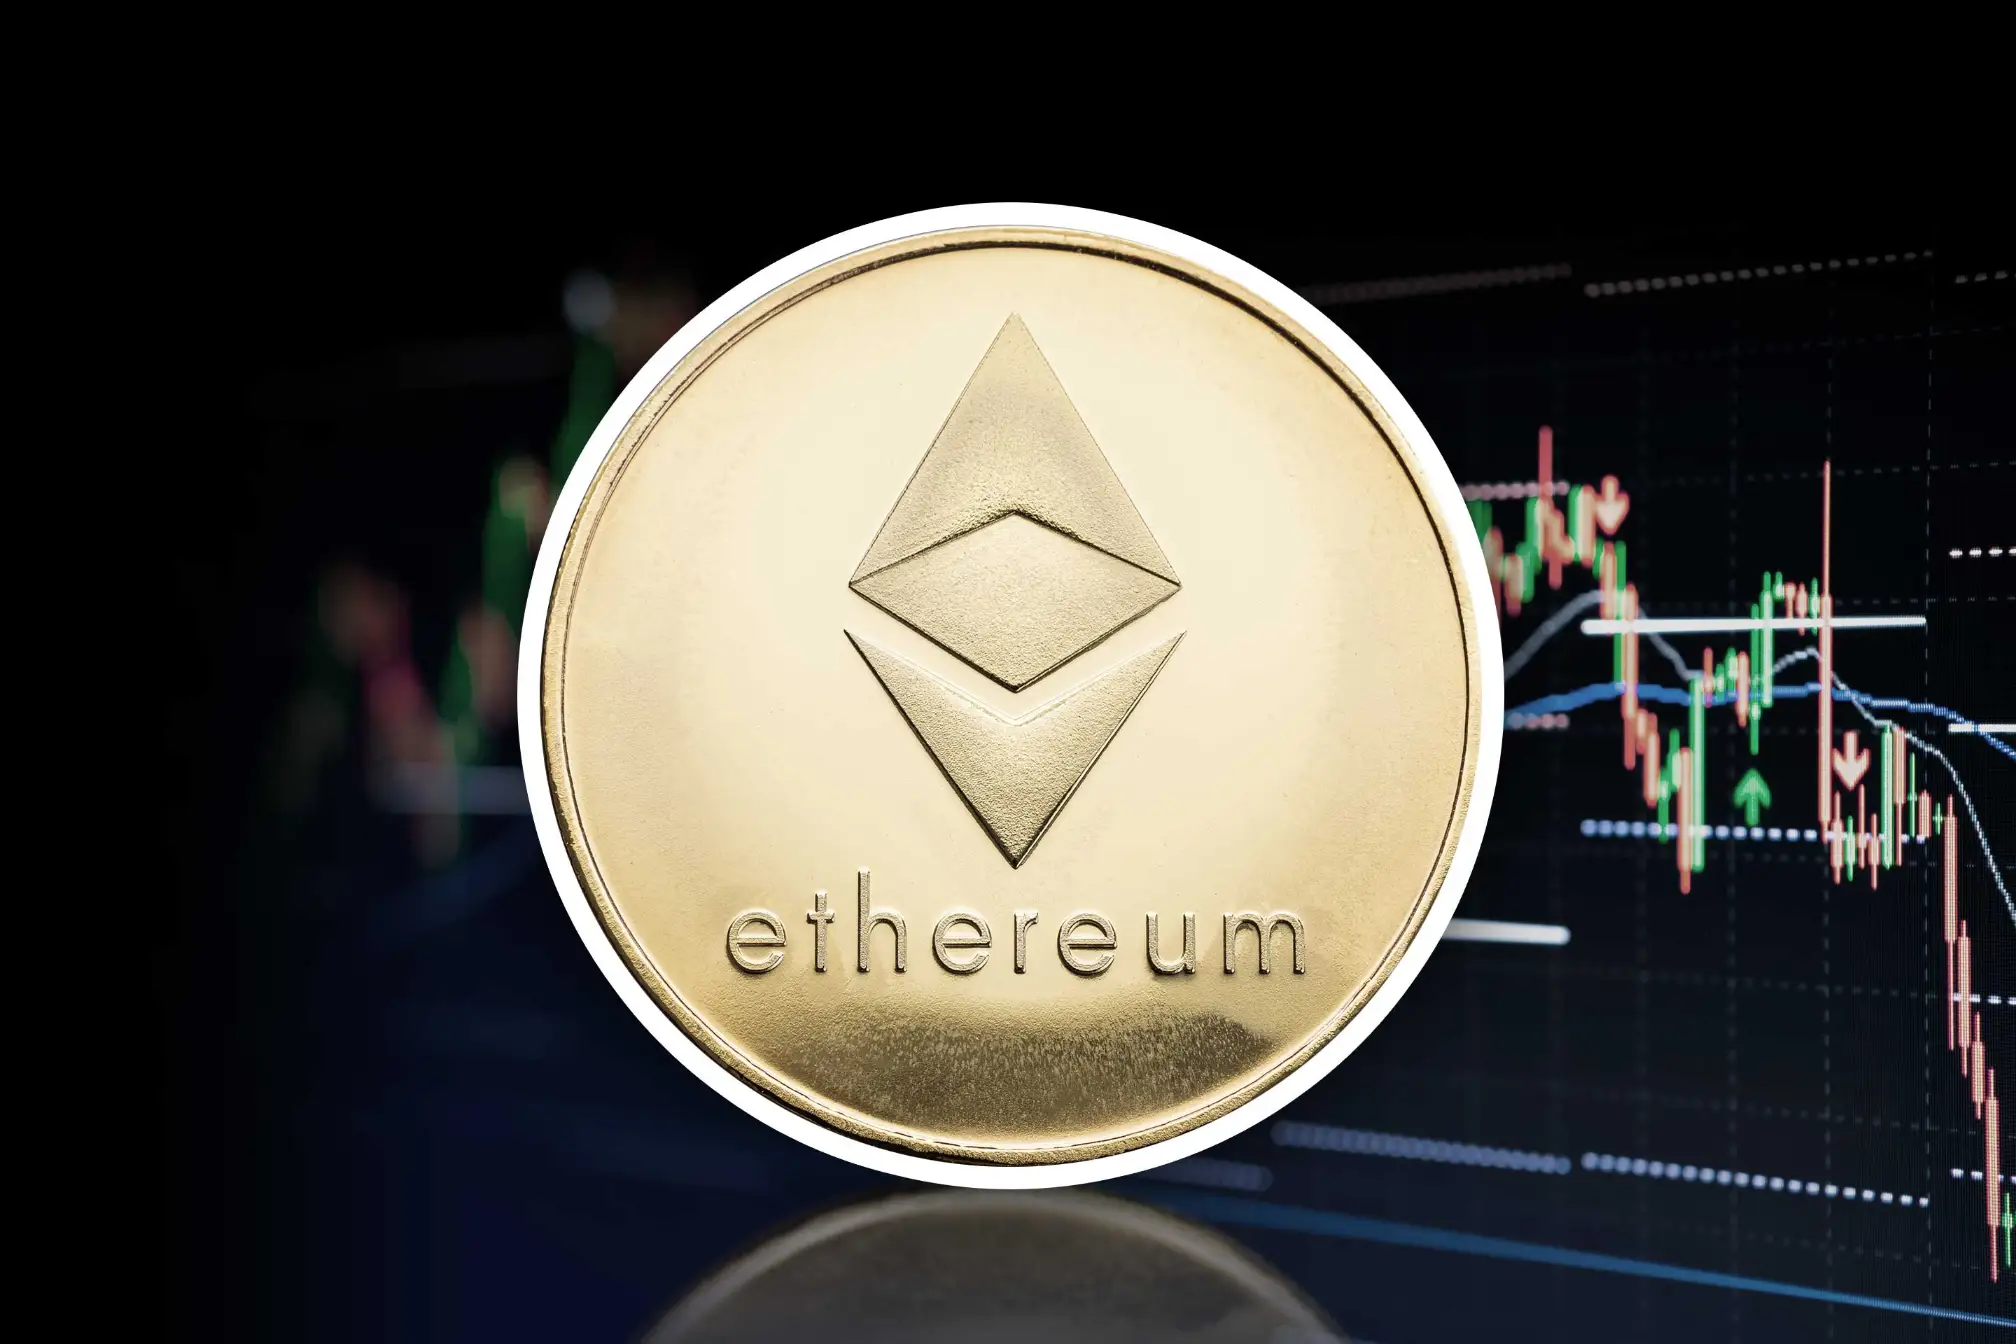 is ethereum primed for a 3000 surge analyzing chart patterns for insights 65b971022e421